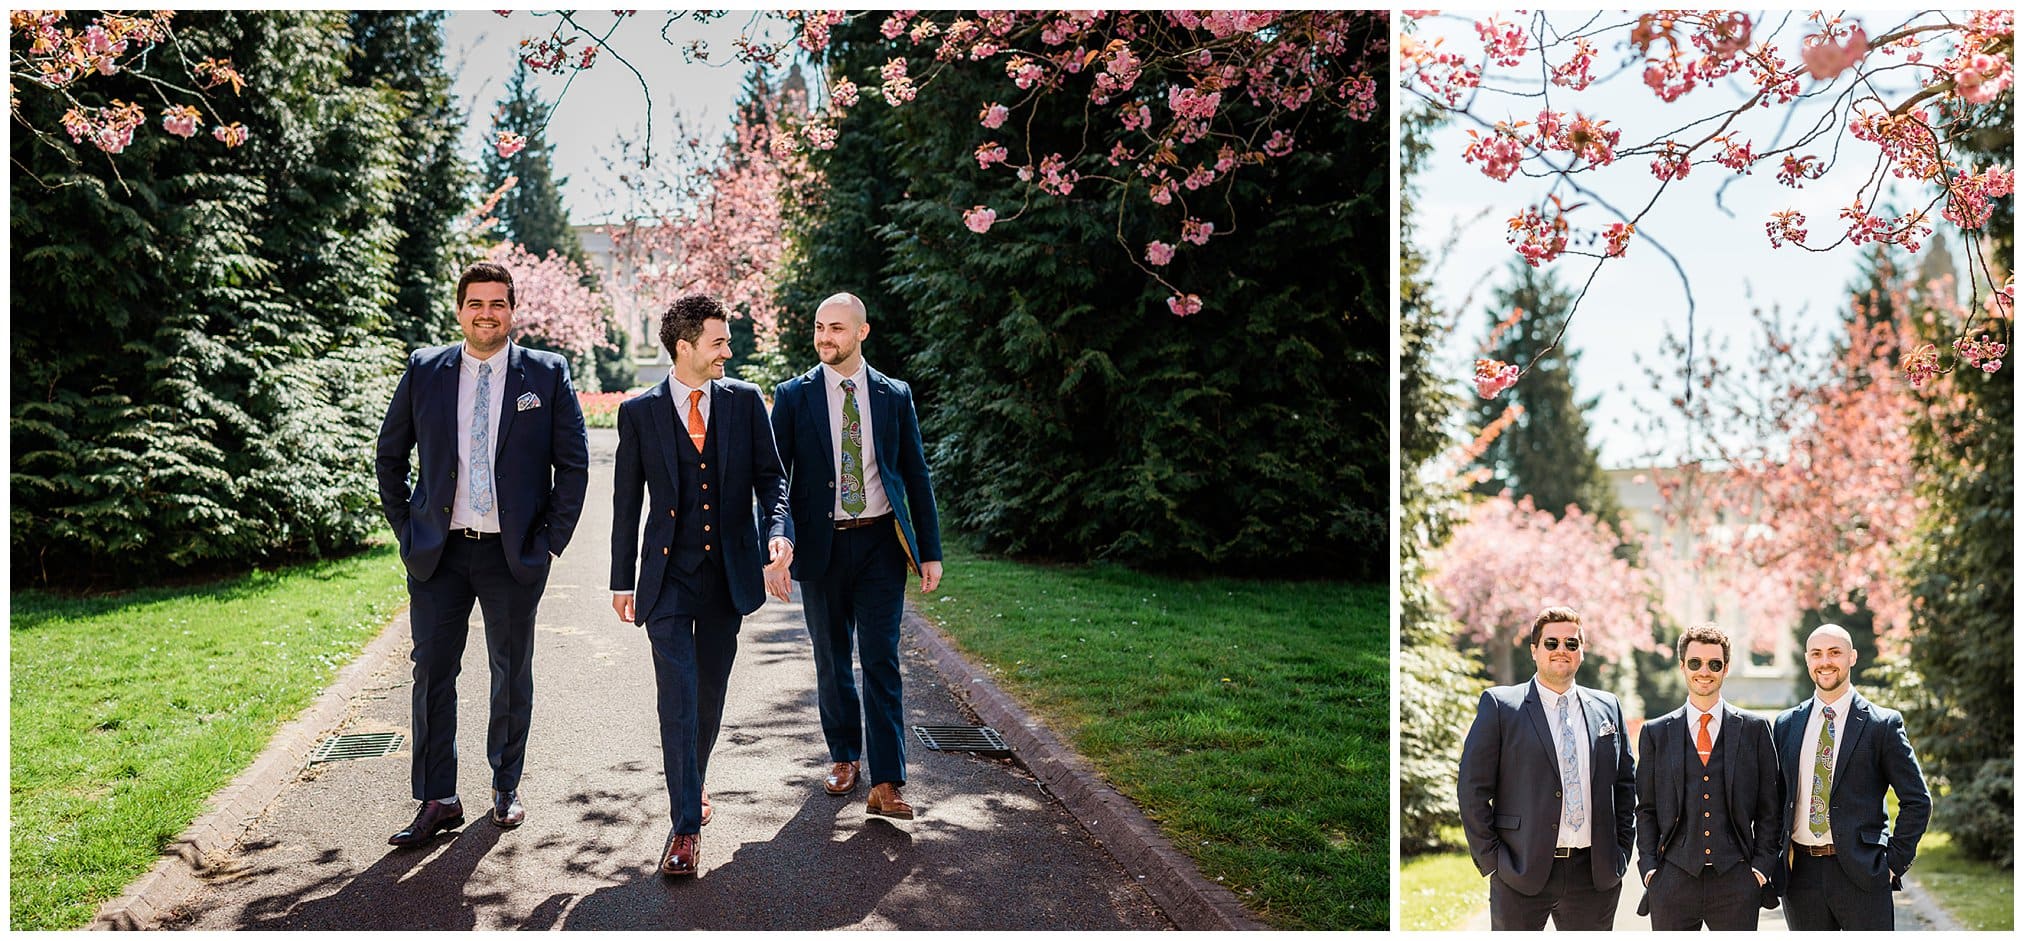 Groom and groomsmen in Alexandra gardens in Cardiff for a wedding.